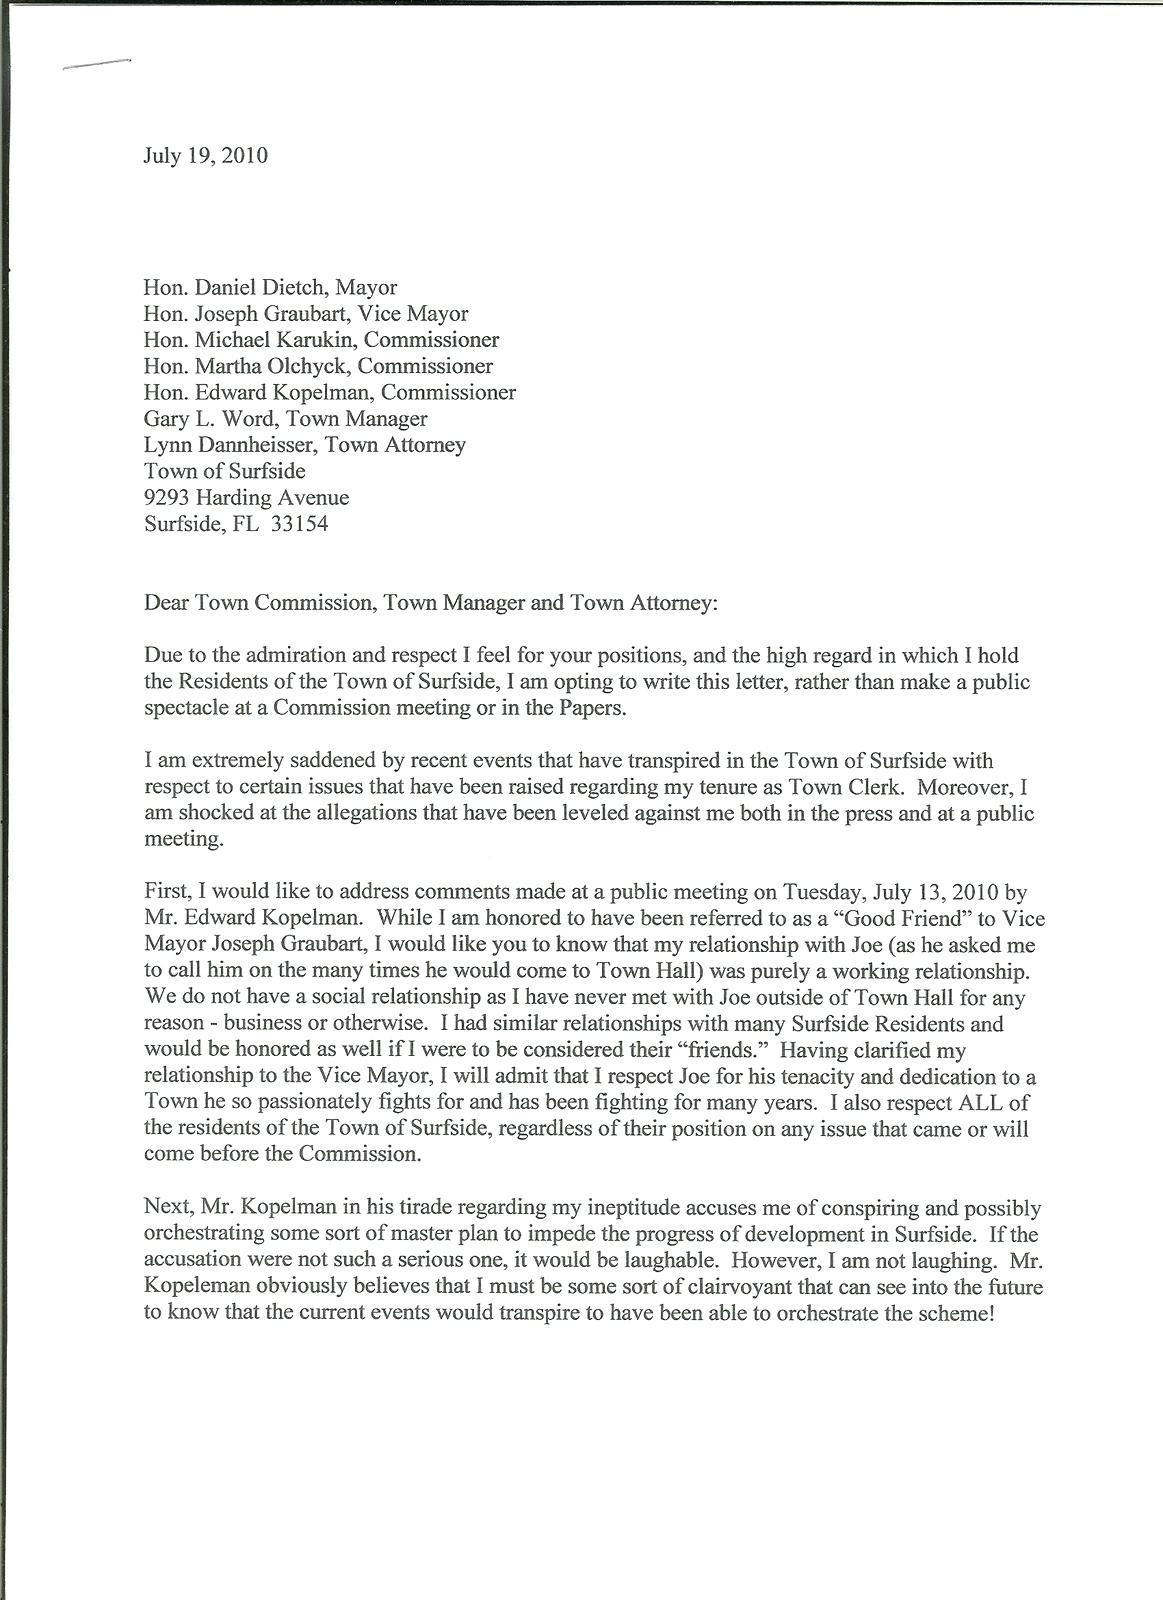 Free Cease and Desist Letter Template for Harassment - Cease and Desist Letter Harassment Template Defamation who Controls